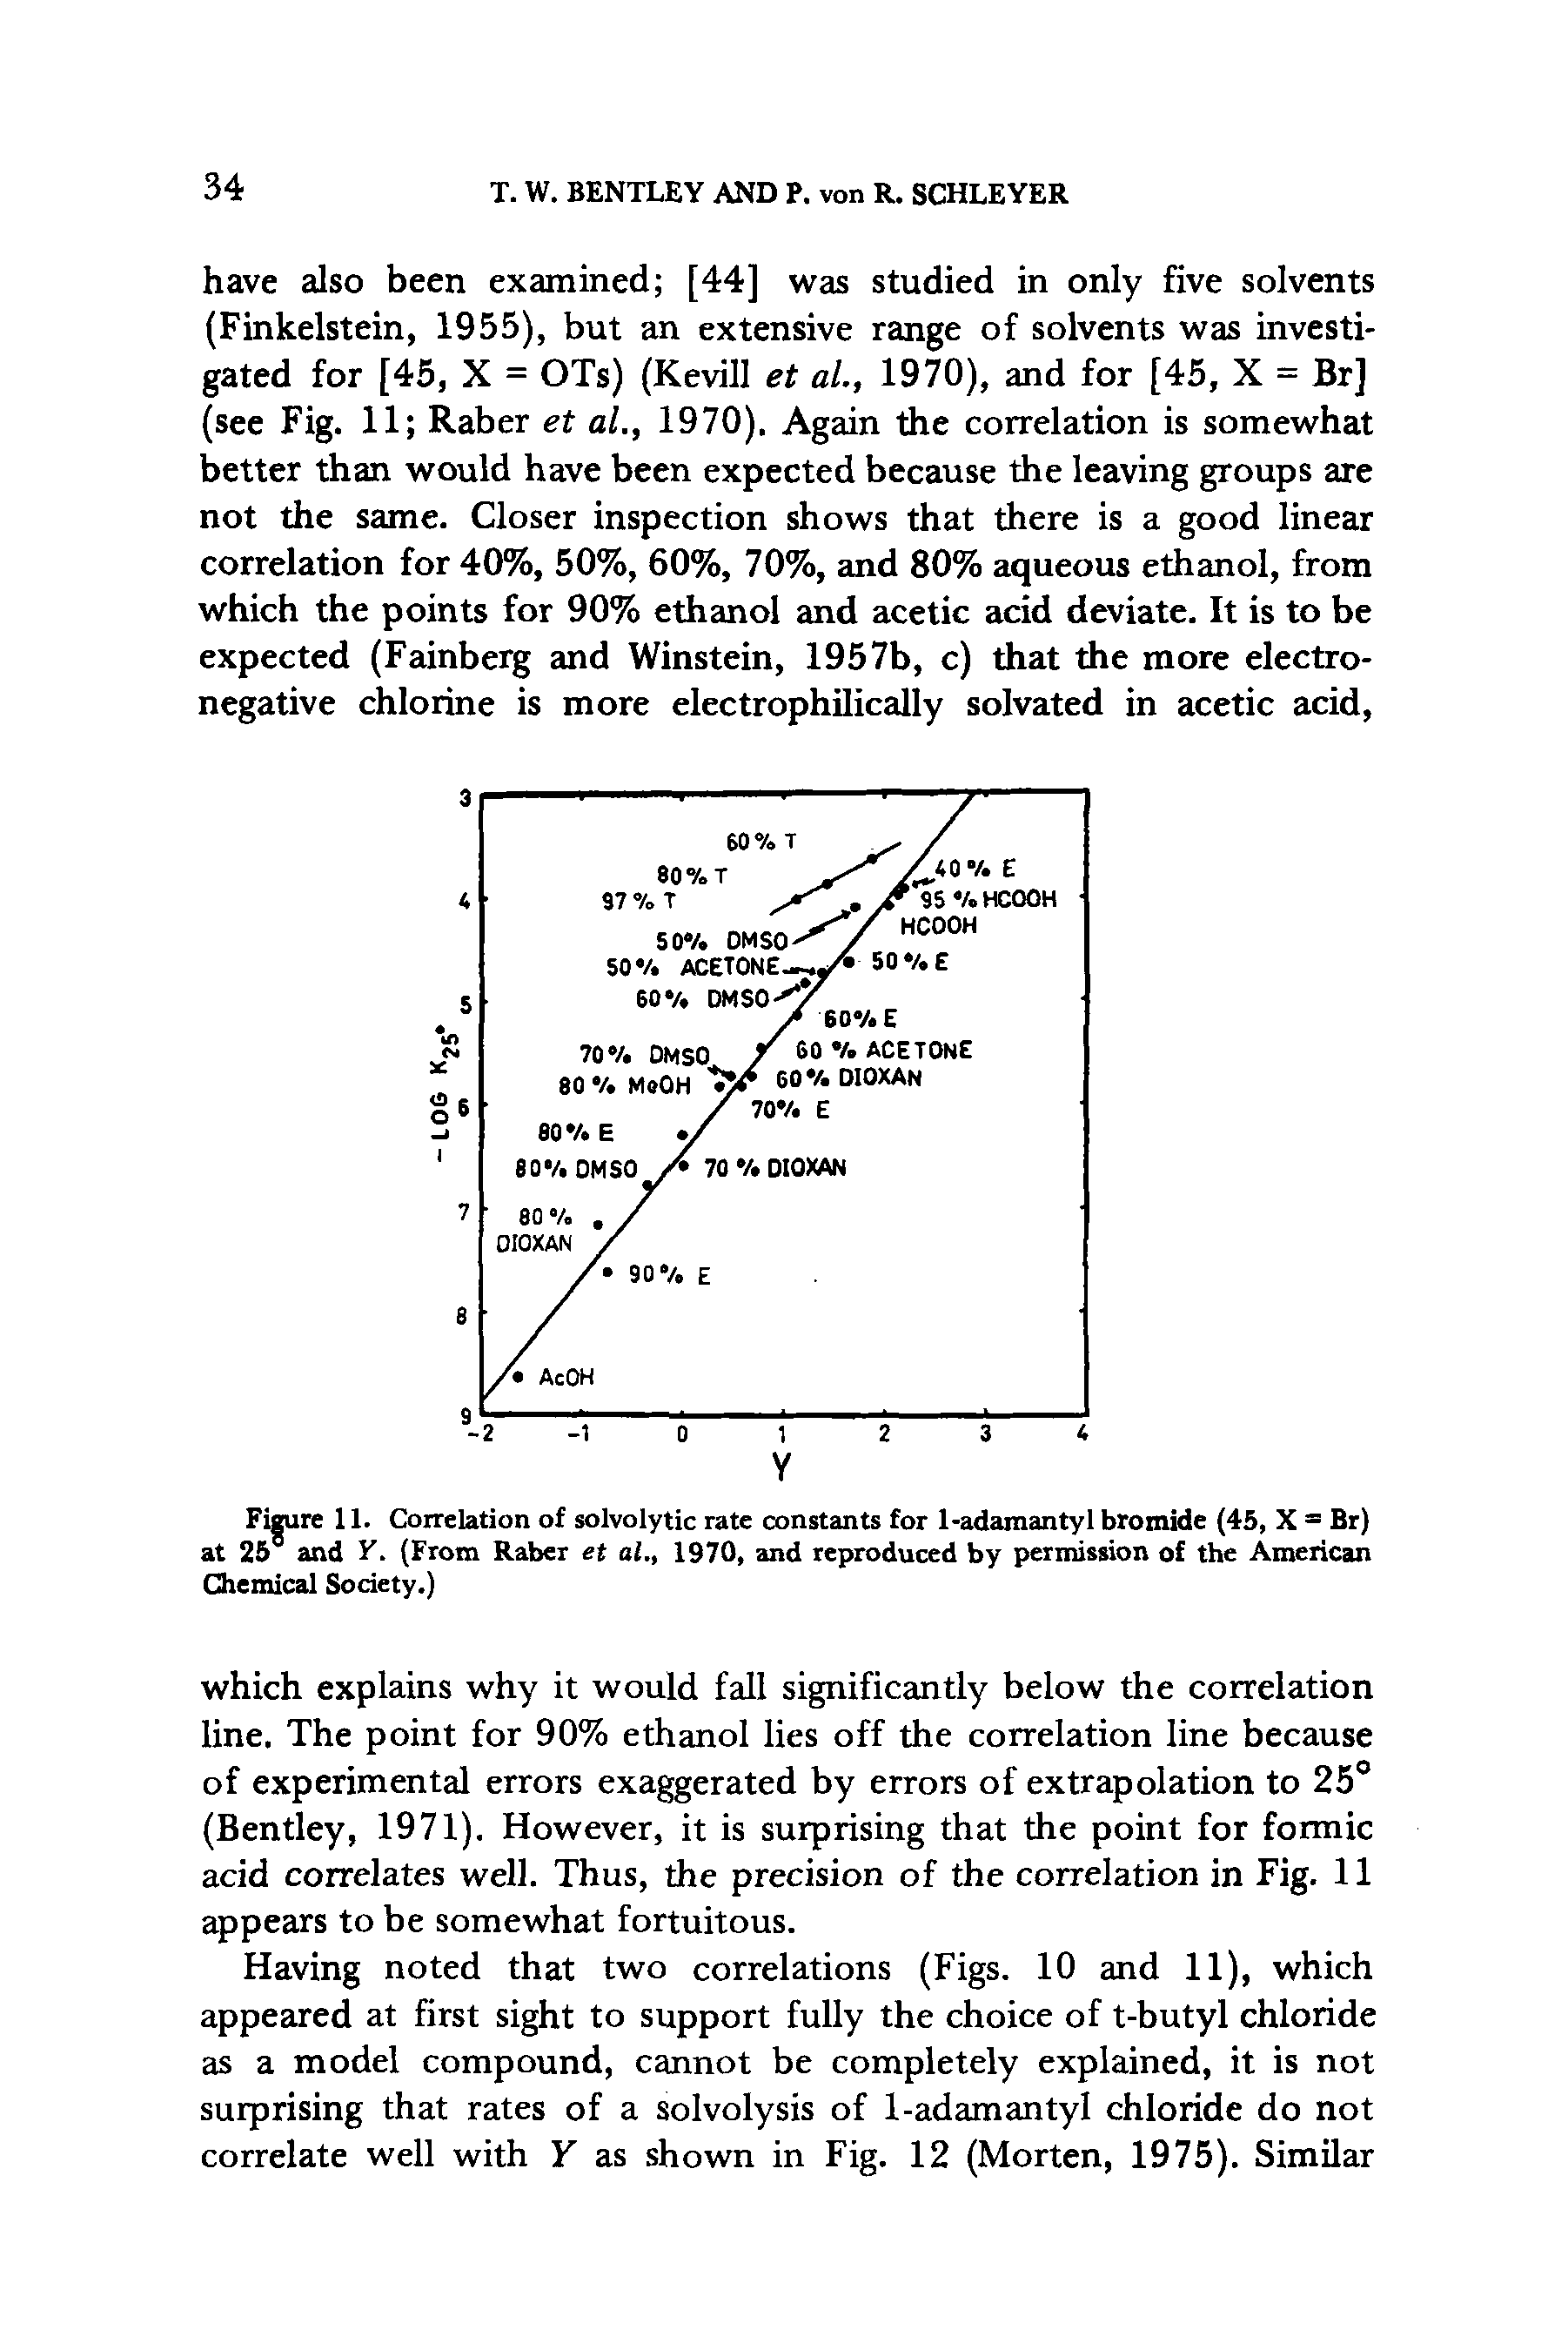 Figure 11. Correlation of solvolytic rate constants for 1-adamantyl bromide (45, X = Br) at 25° and Y. (From Raber et al., 1970, and reproduced by permission of the American Chemical Society.)...